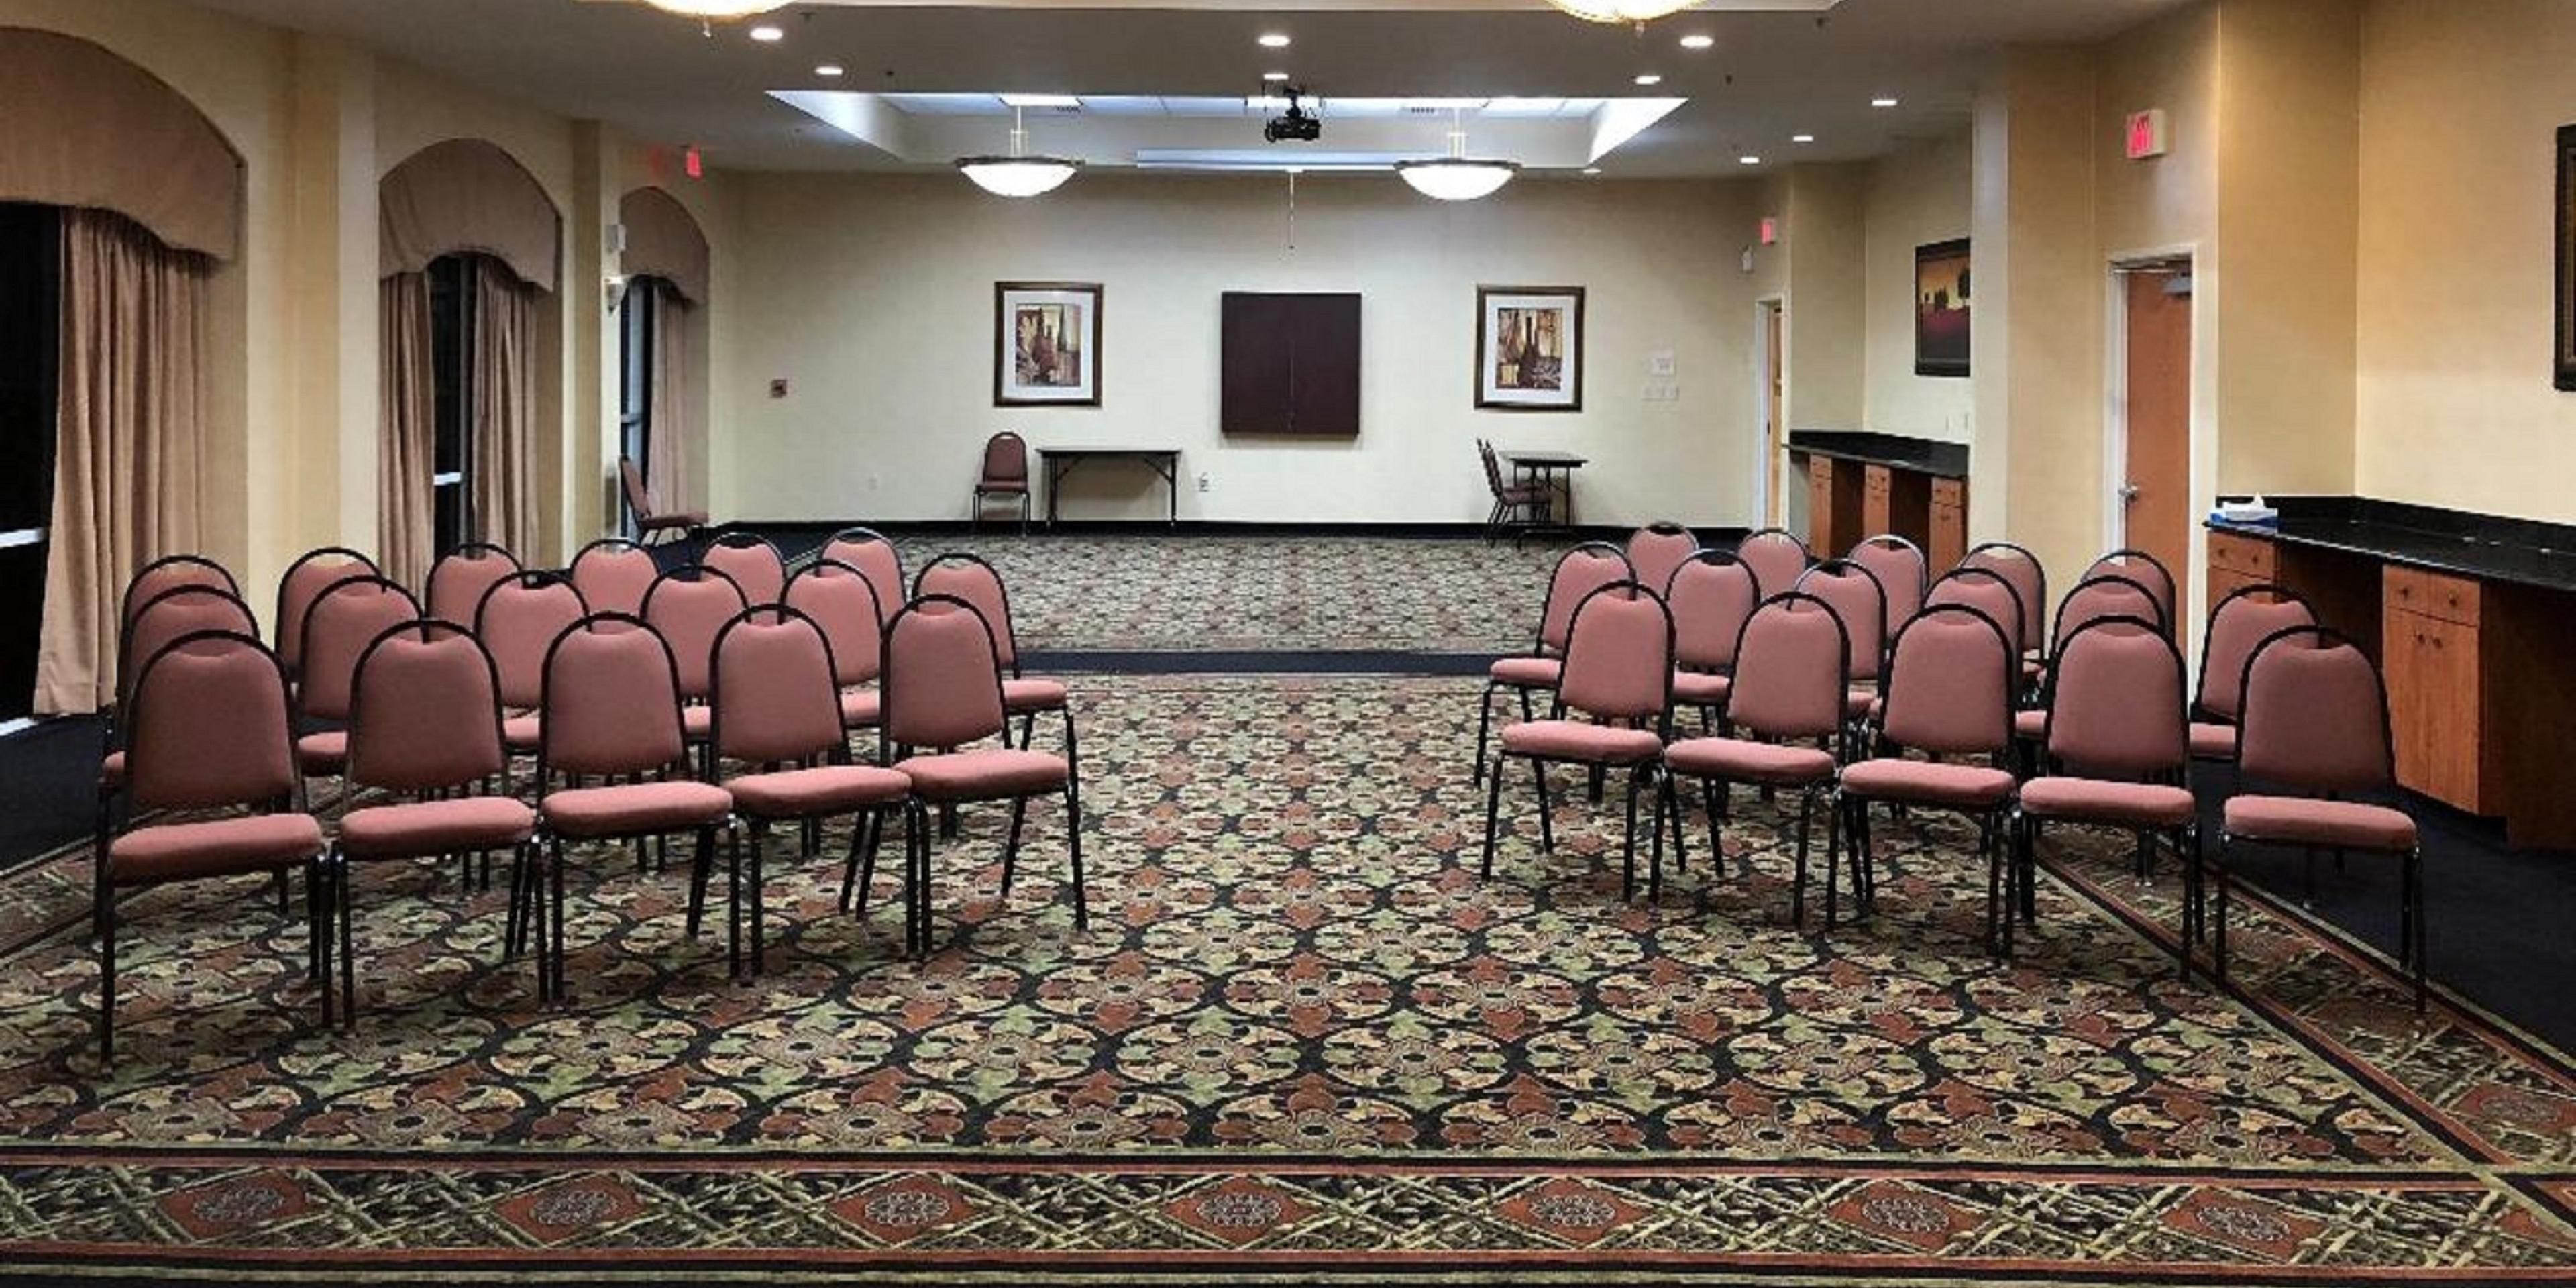 The Holiday Inn Express in La Plata has a beautiful and elegant banquet facility where you can have Corporate meetings, conferences or training events. Our team will partner with you to plan and execute functions that make your event as successful and comfortable as possible. There is ample complimentary parking and free Wi-Fi.